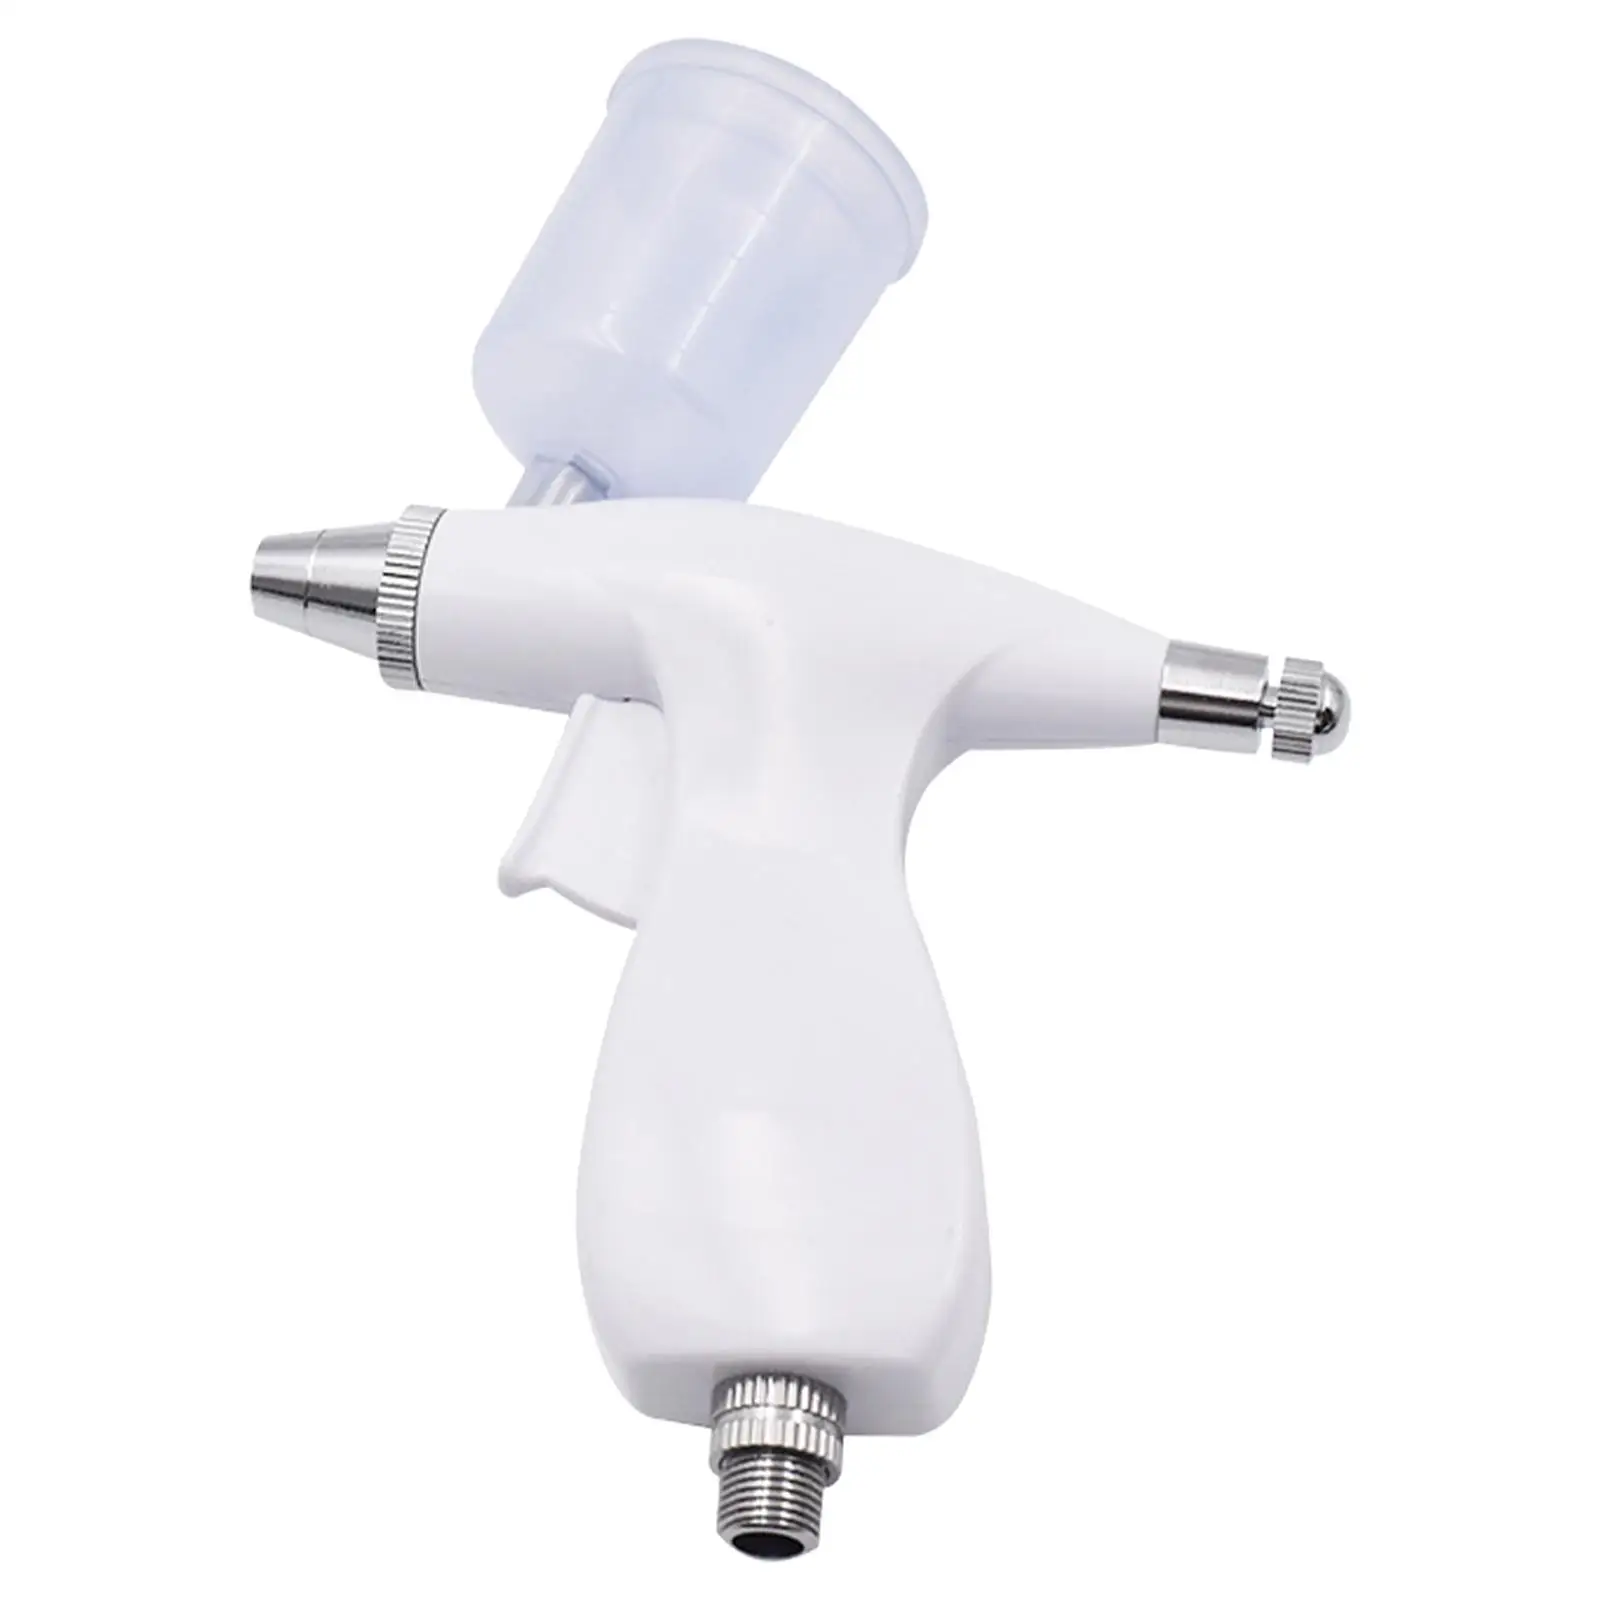 Mini Airbrush Spray Gun 1/8 Connector 0.4mm Nozzle Airbrush Nozzle for Makeup Model Painting Cake Decorating Manicure Nail Art